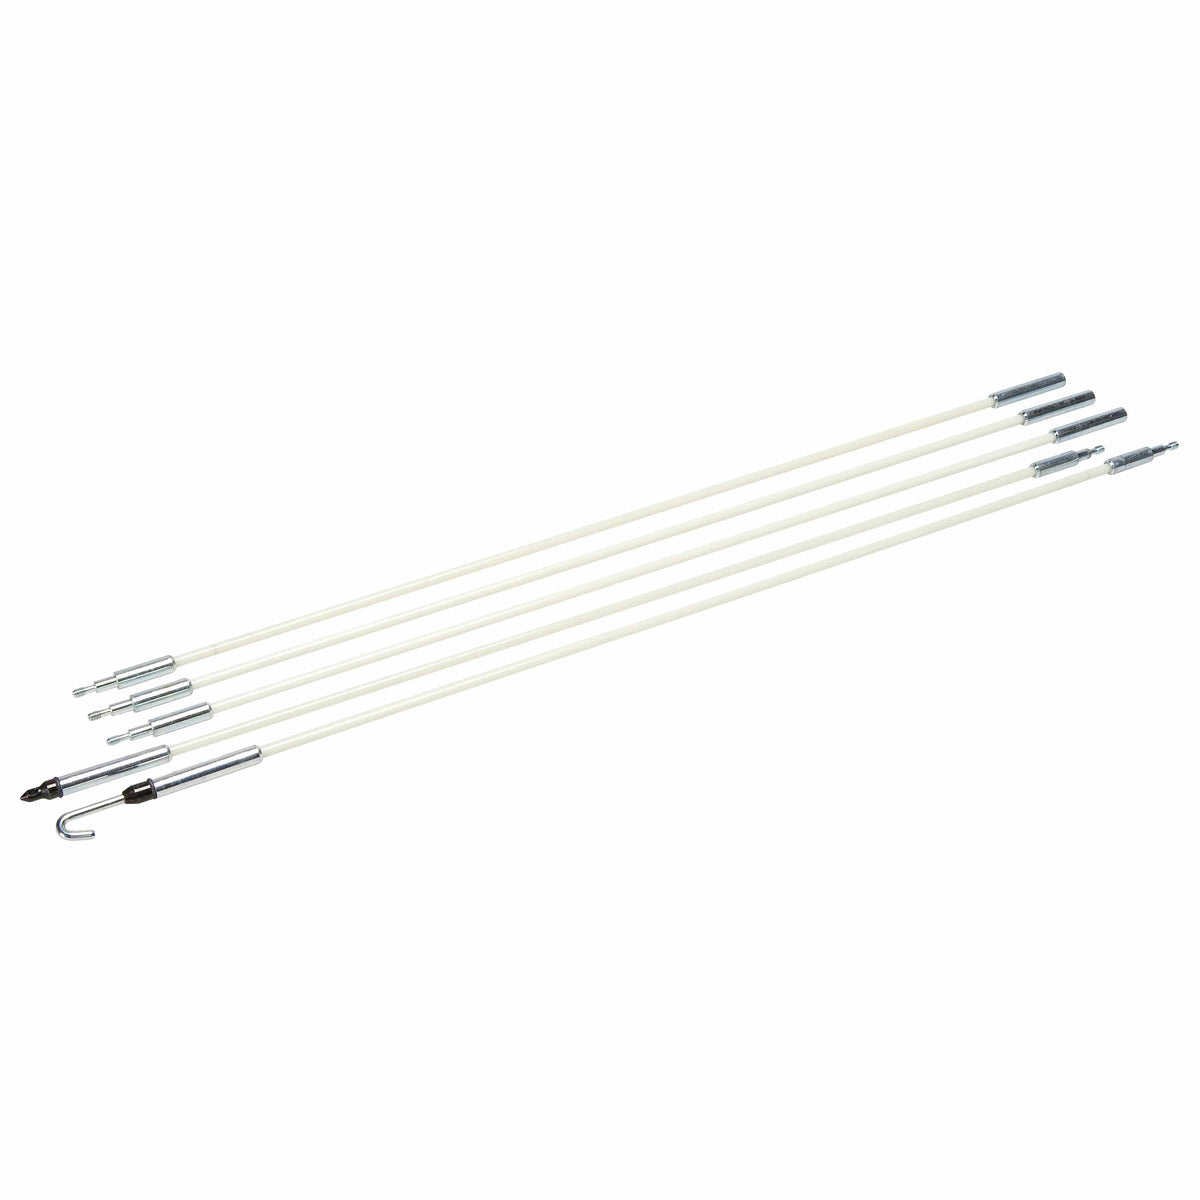 Greenlee 540-8M 3/16" x 8' Long Glo Stix Kit with Bullet and "J" Hook Nose Tips